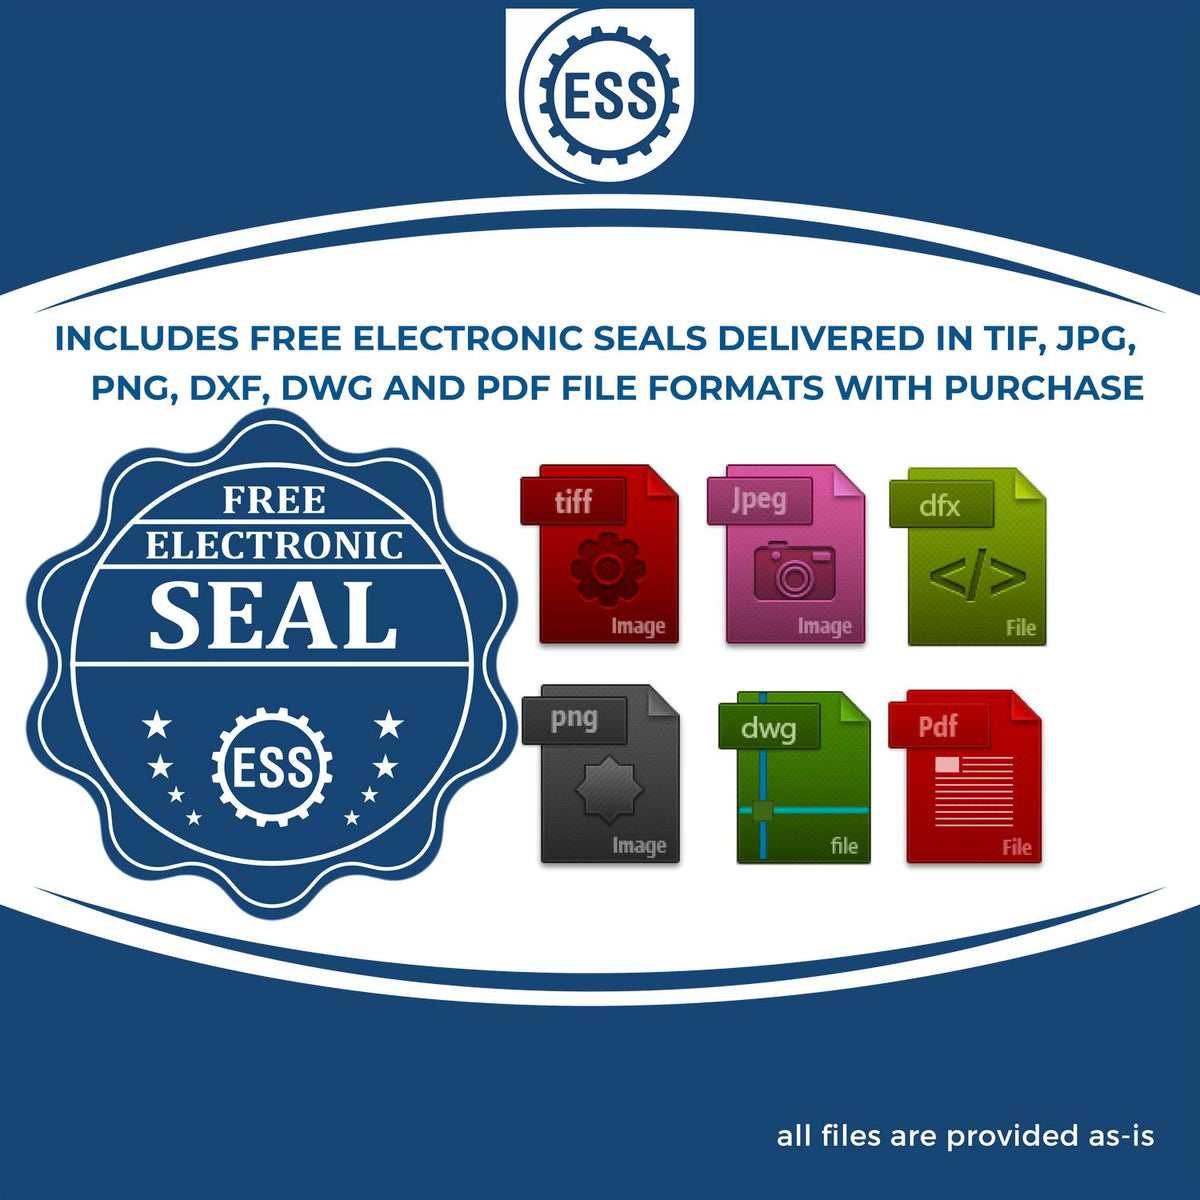 An infographic for the free electronic seal for the Gift New Jersey Landscape Architect Seal illustrating the different file type icons such as DXF, DWG, TIF, JPG and PNG.